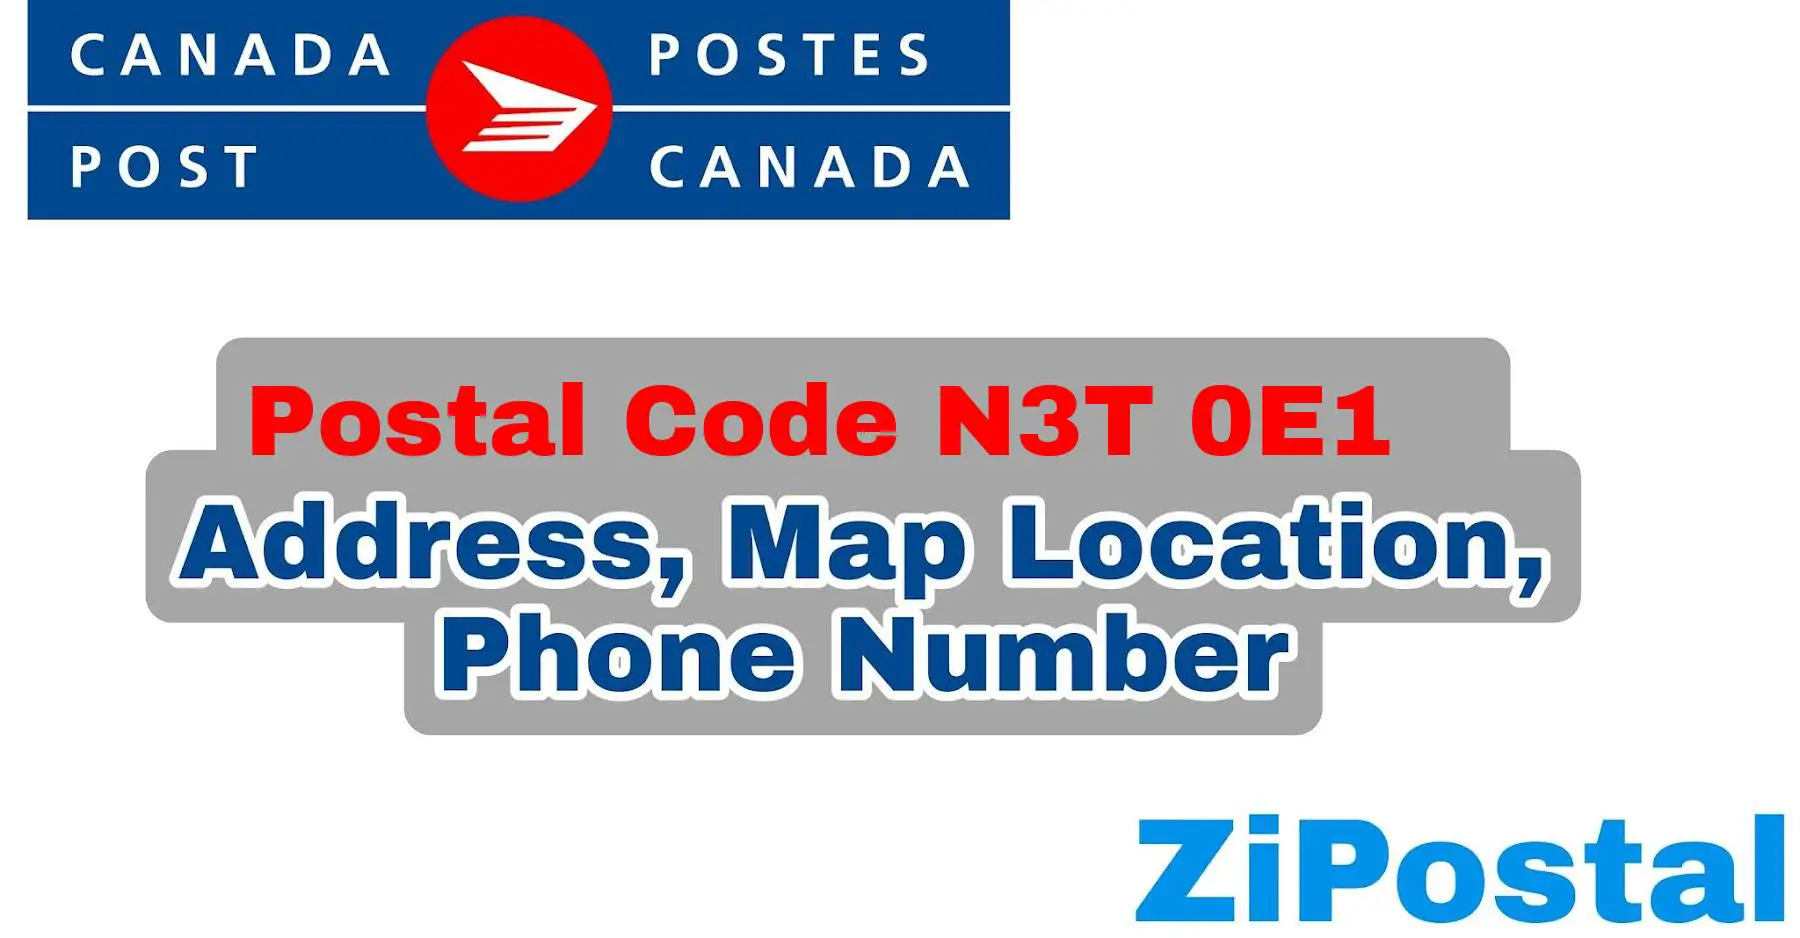 Postal Code N3T 0E1 Address Map Location and Phone Number